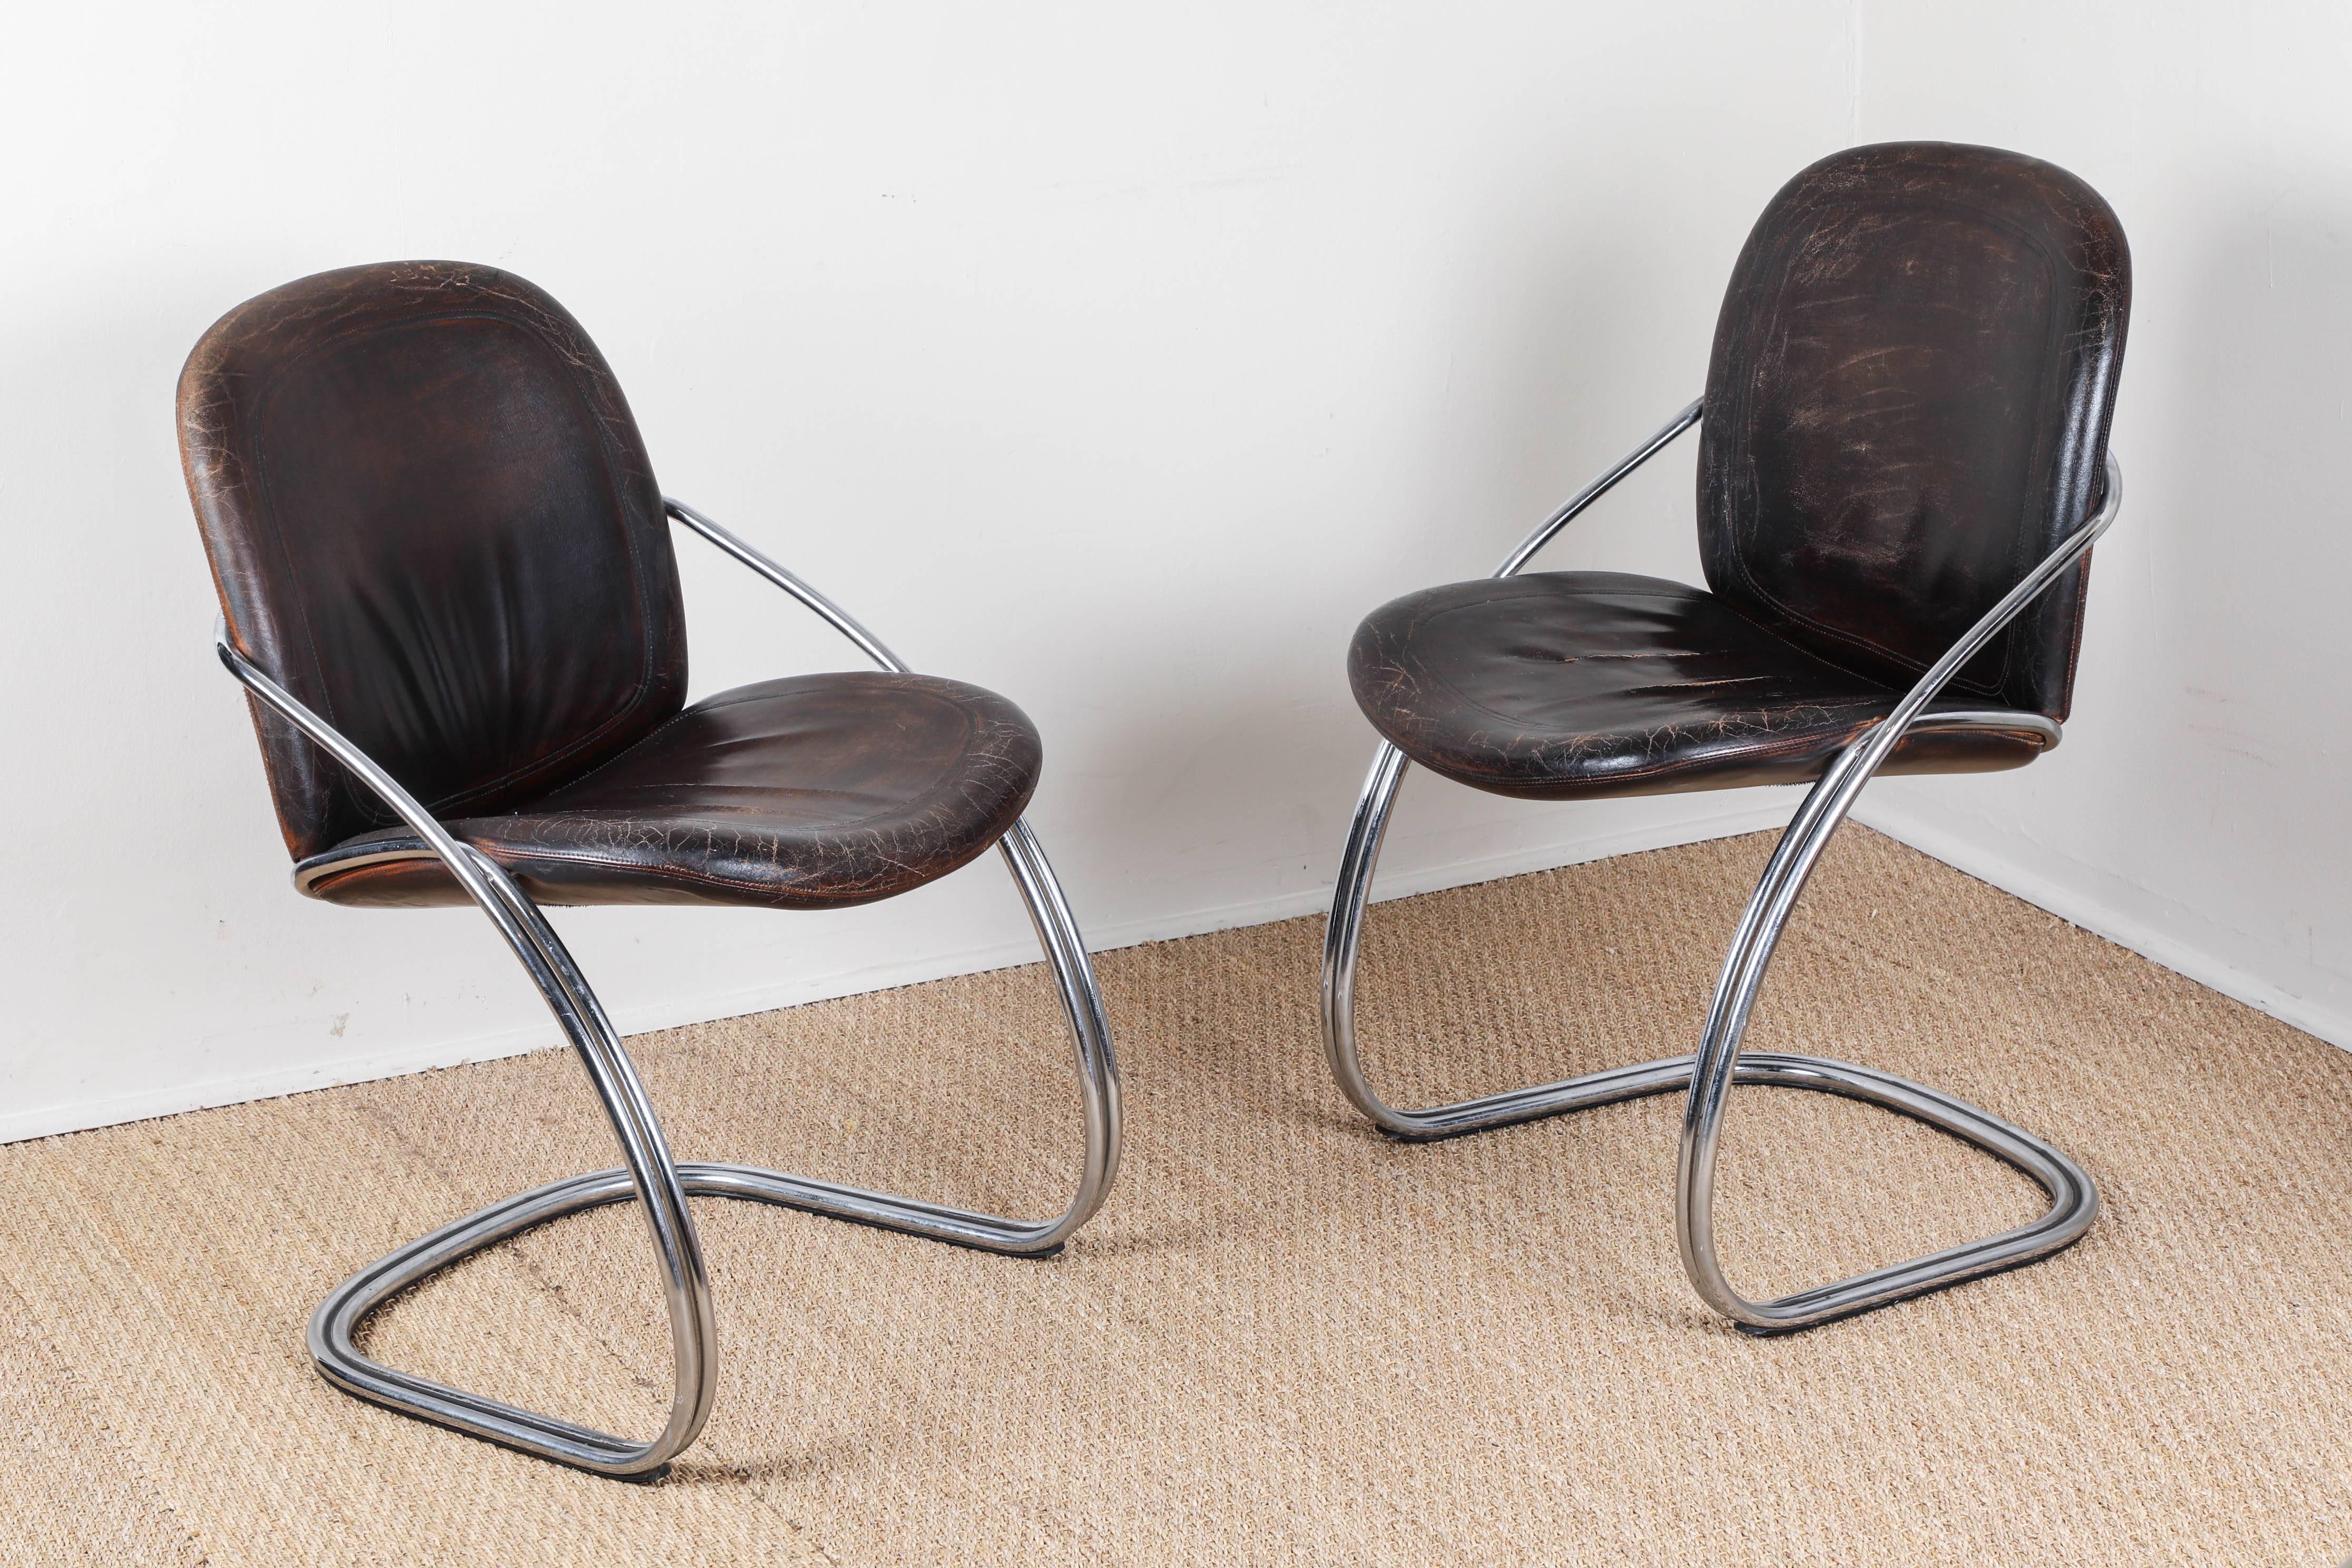 Ergonomic chrome chairs. Distressed dark brown leather seats and backs.  One chair SOLD
 